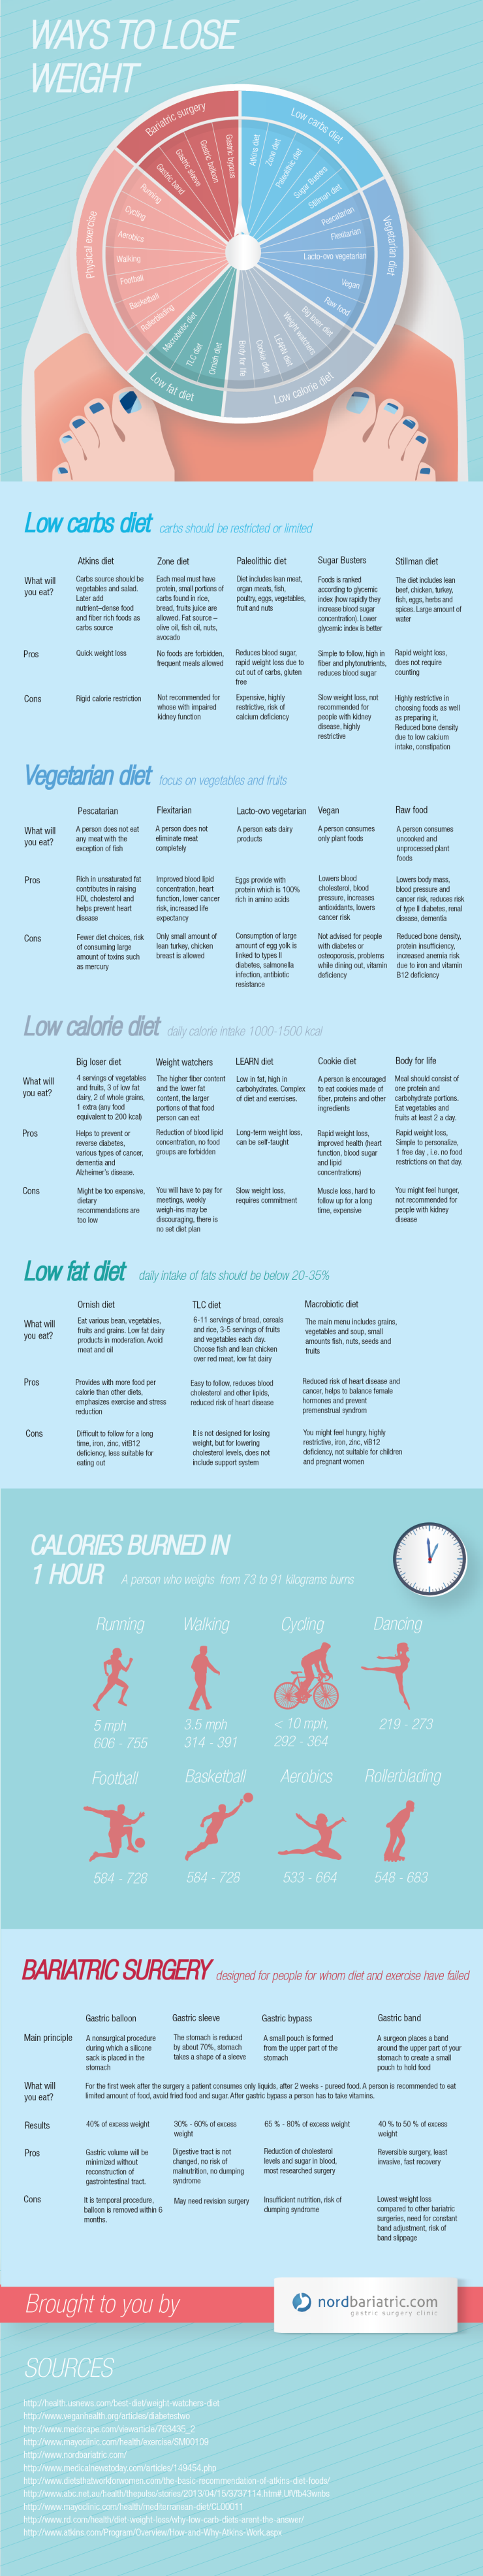 Weight loss by diet dieting losing weight